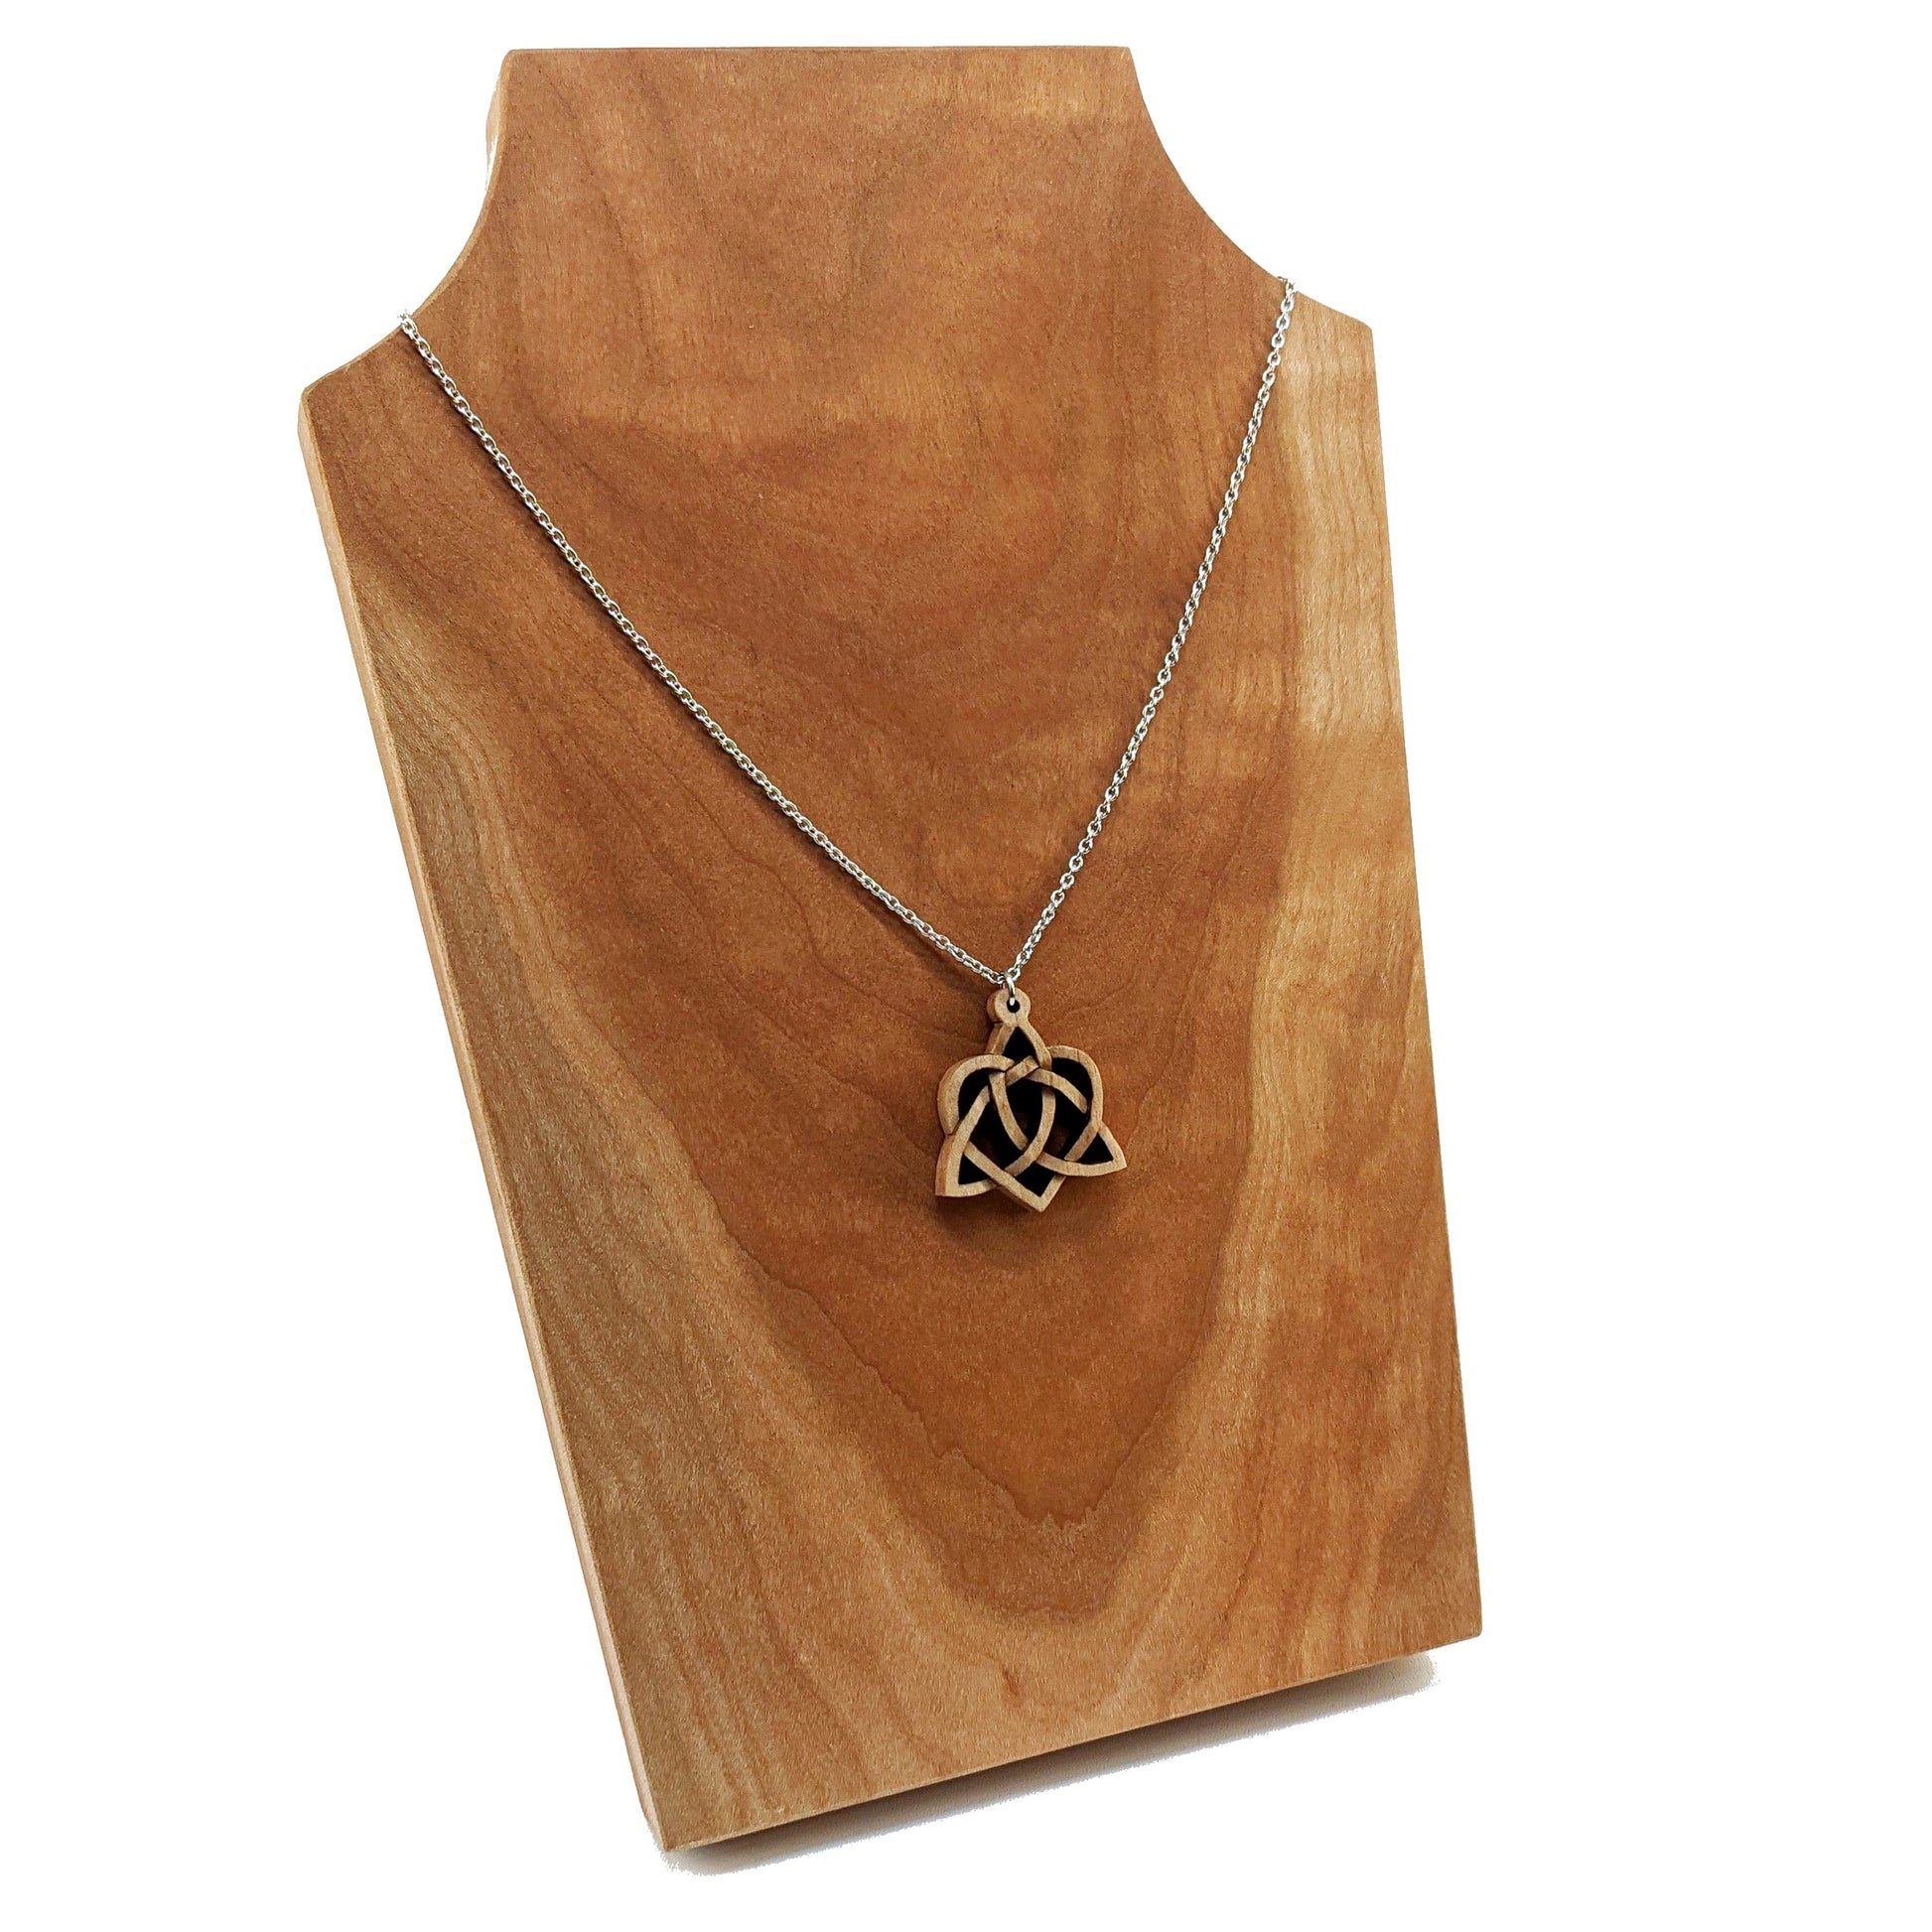 Wooden necklace pendant created in the style of a Celtic weave pattern that is a trinity and heart combined. The symbol represents adoption. Hanging from a silver stainless steel chain against a cherry wood display.